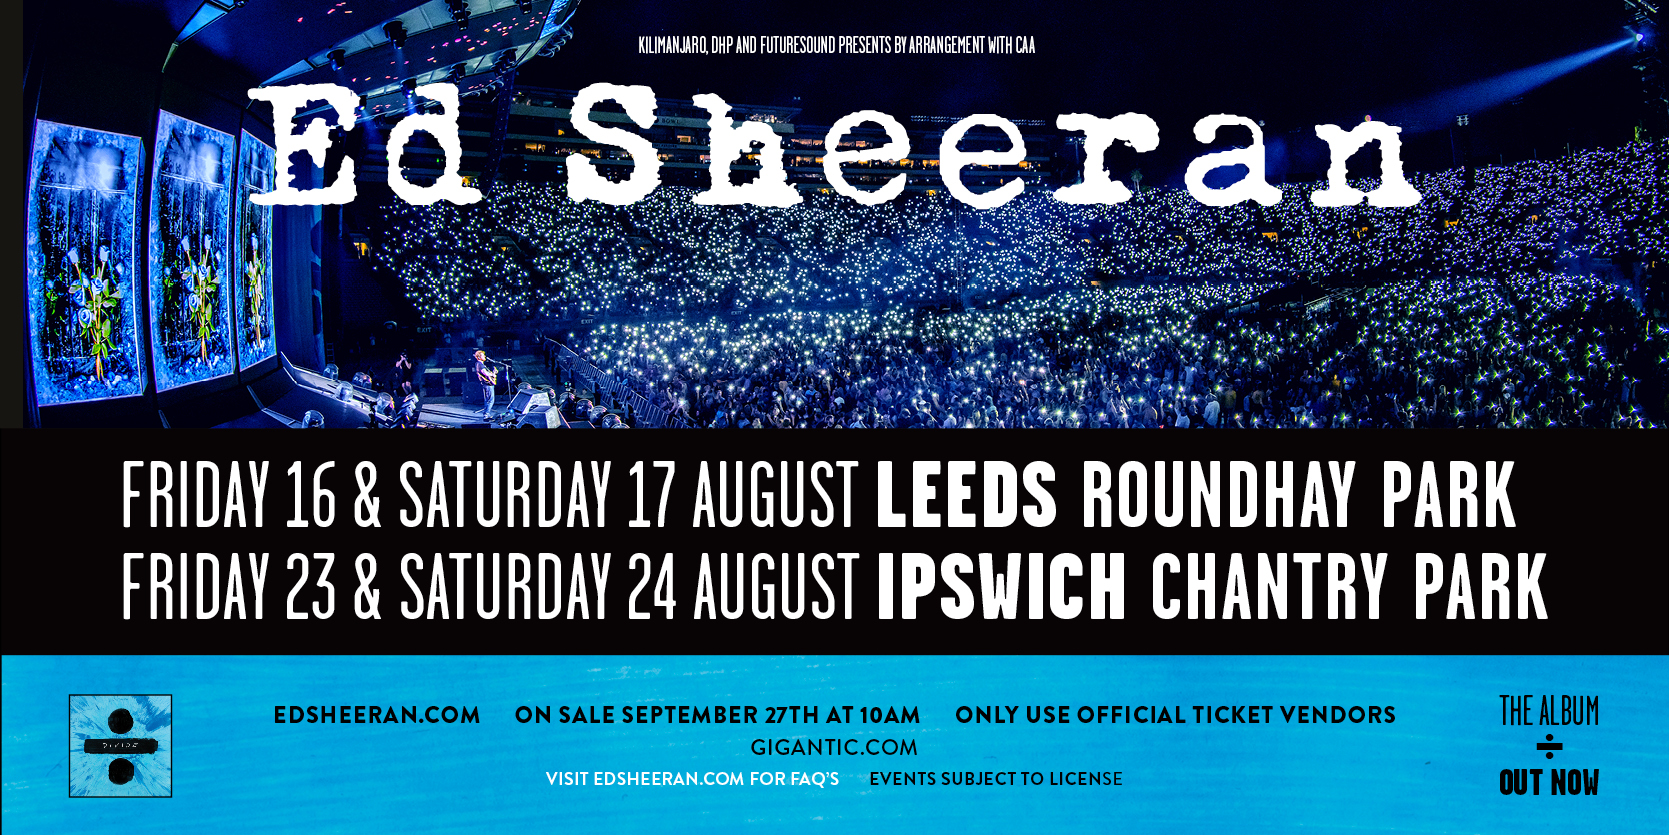 Weekender: An insider’s guide to getting Ed Sheeran 2019 tickets ...